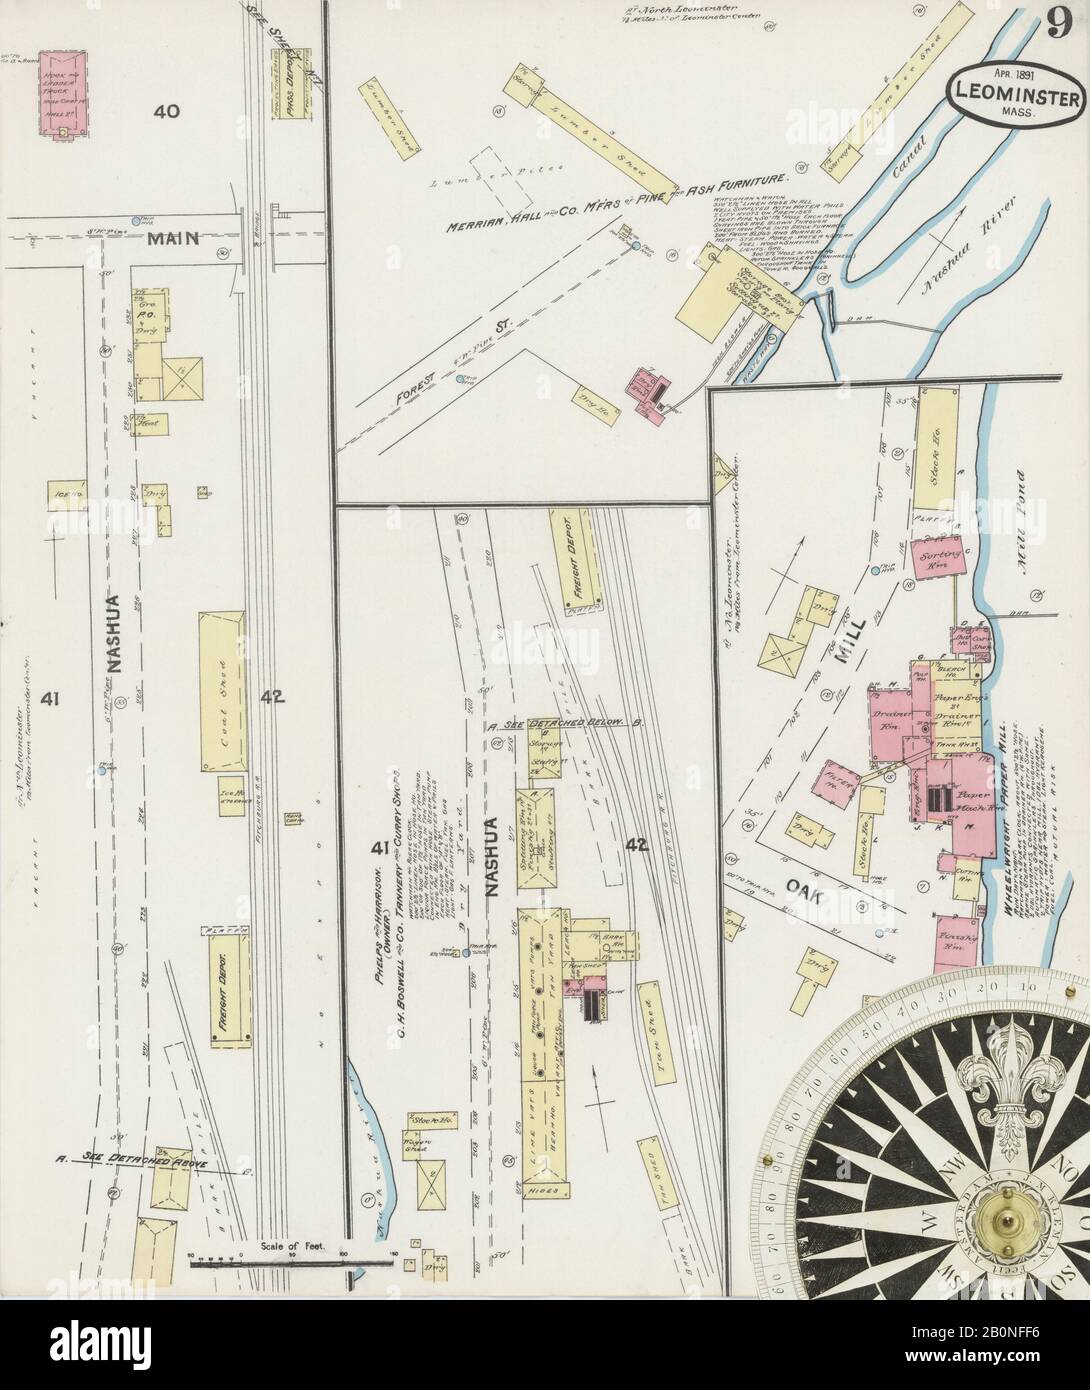 Image 9 of Sanborn Fire Insurance Map from Leominster, Worcester County, Massachusetts. Apr 1891. 10 Sheet(s), America, street map with a Nineteenth Century compass Stock Photo